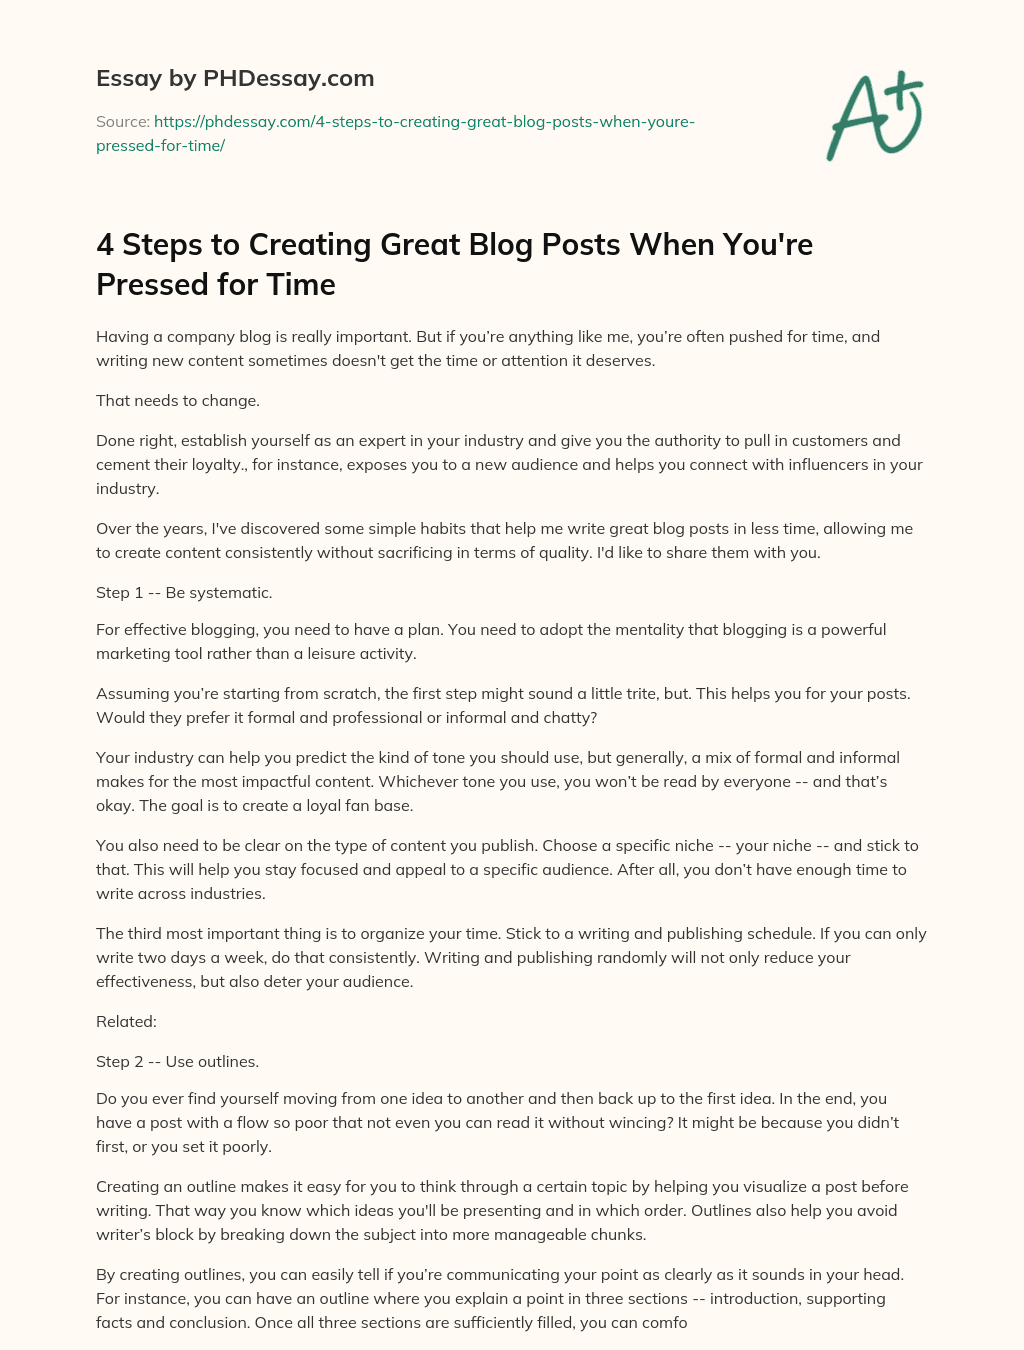 4 Steps to Creating Great Blog Posts When You’re Pressed for Time essay